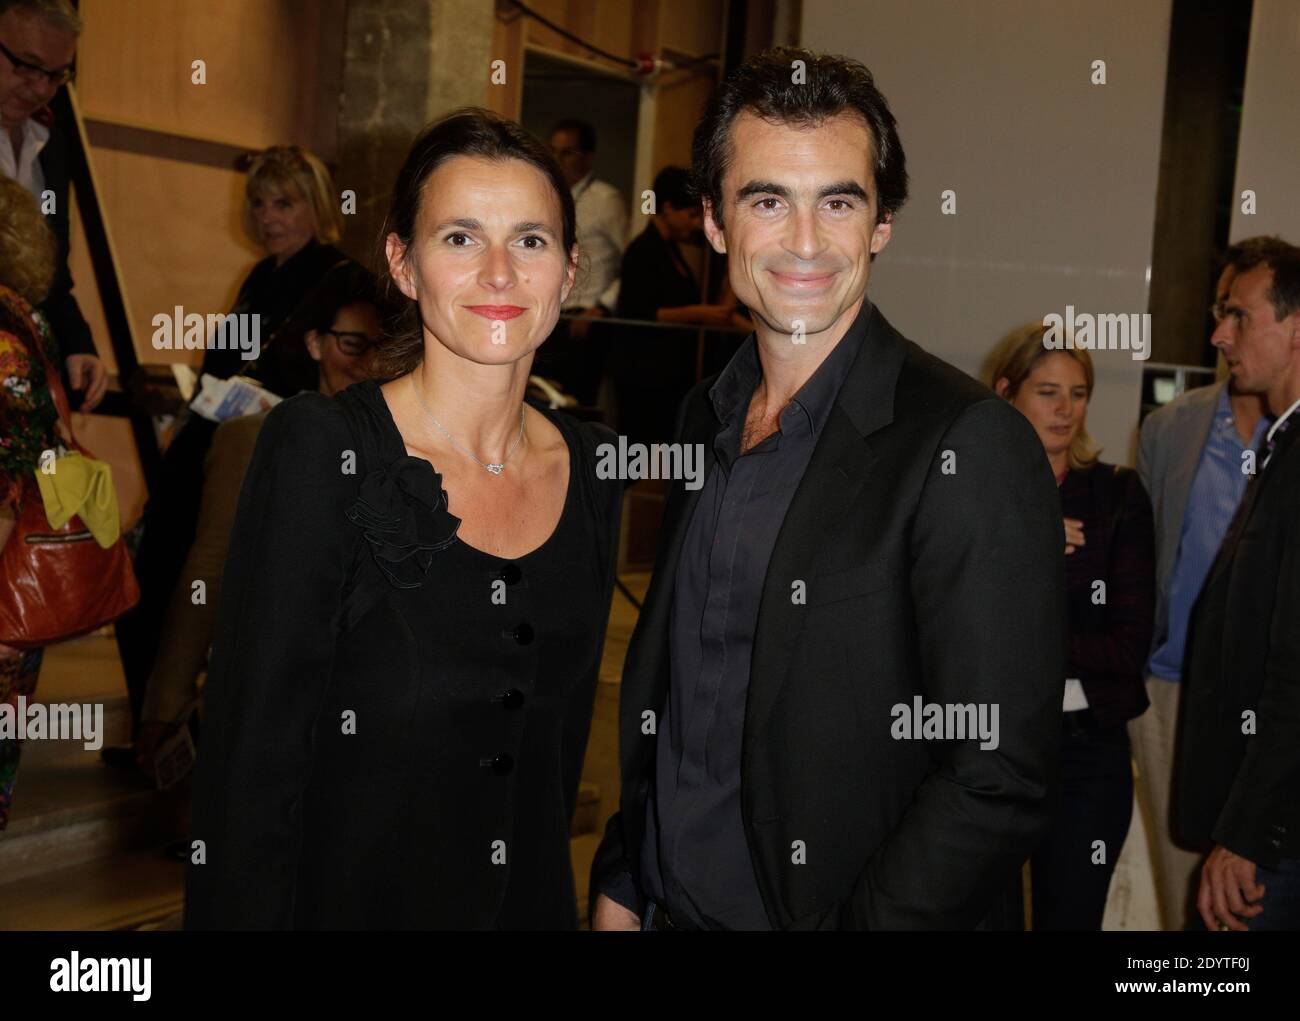 Aurelie Filippetti and Raphael Enthoven attending the 50th anniversary of France  Culture held at 'Palais de Tokyo' in Paris, France on September 07, 2013.  Photo by Jerome Domine/ABACAPRESS.COM Stock Photo - Alamy